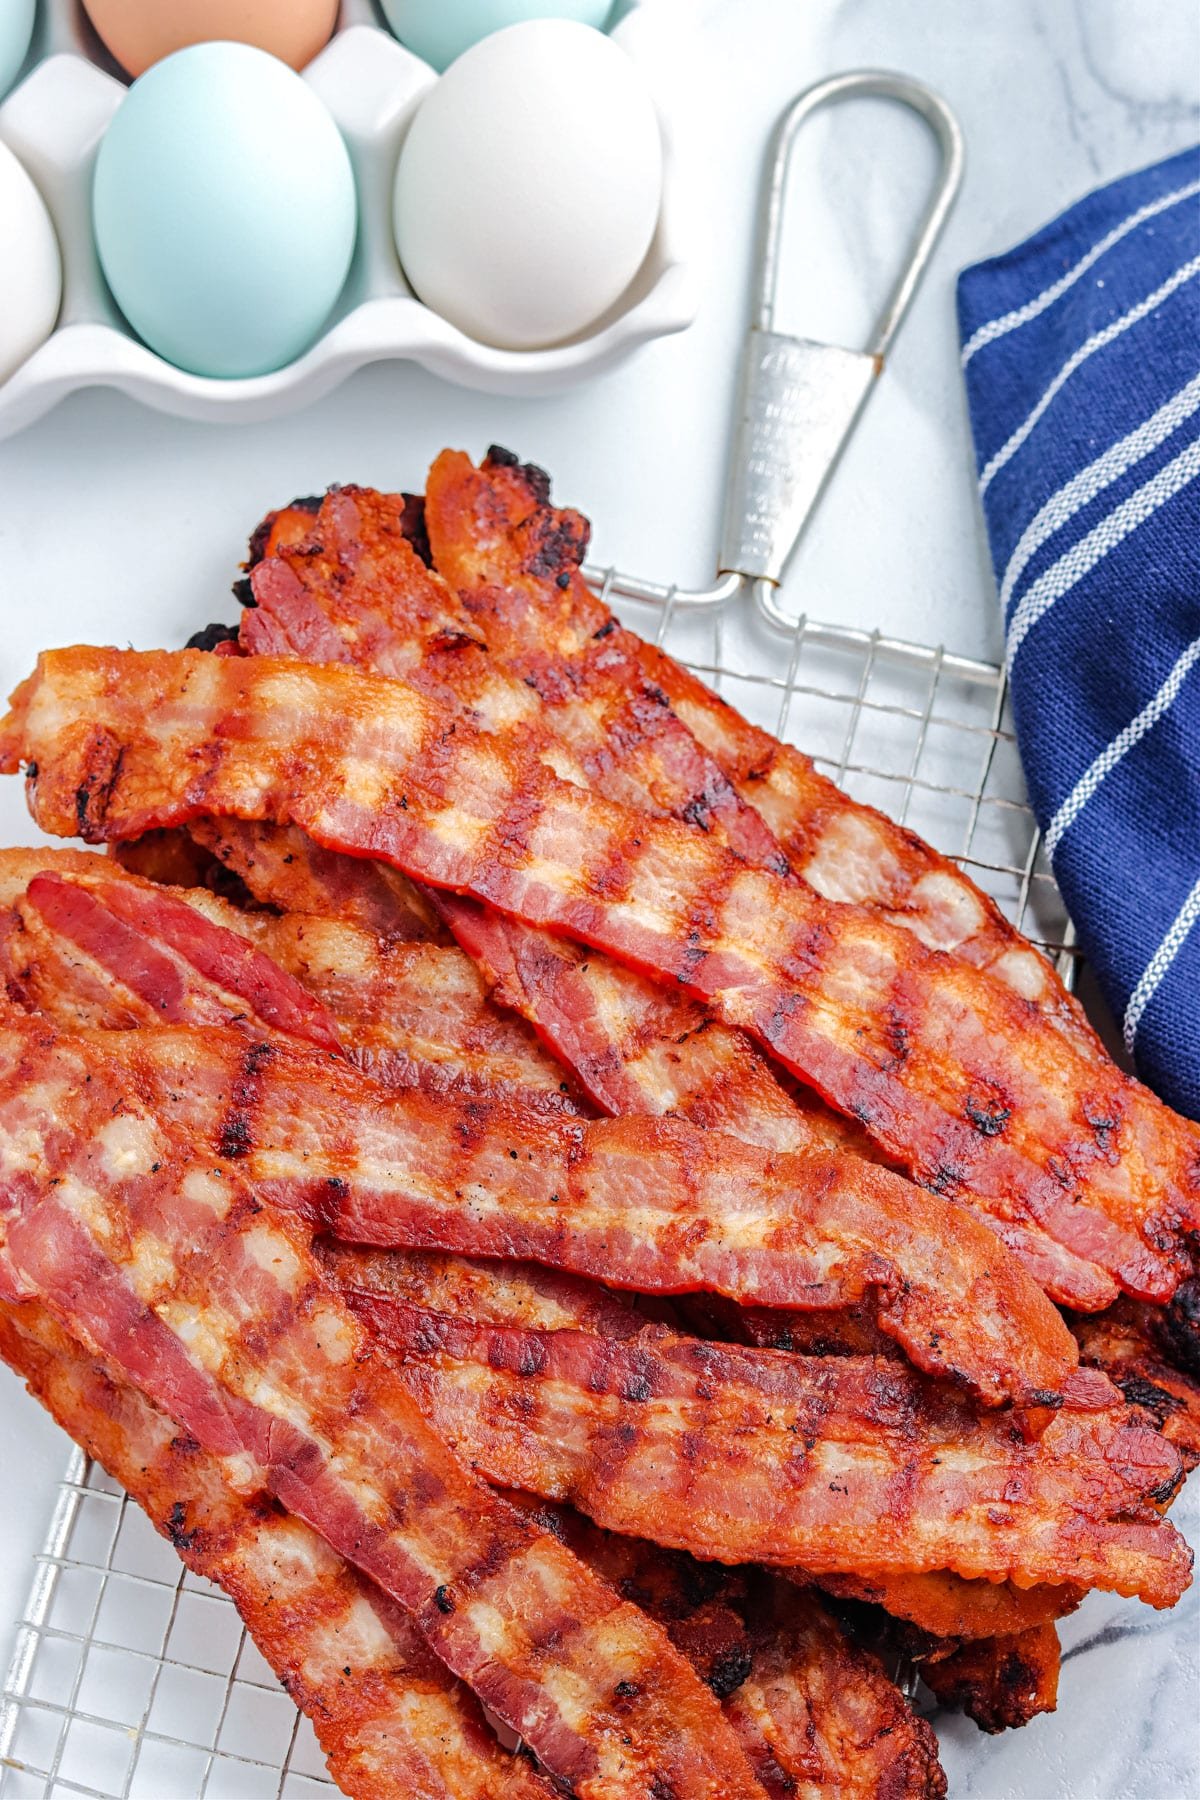 A pile of Grilled Bacon on a serving board.